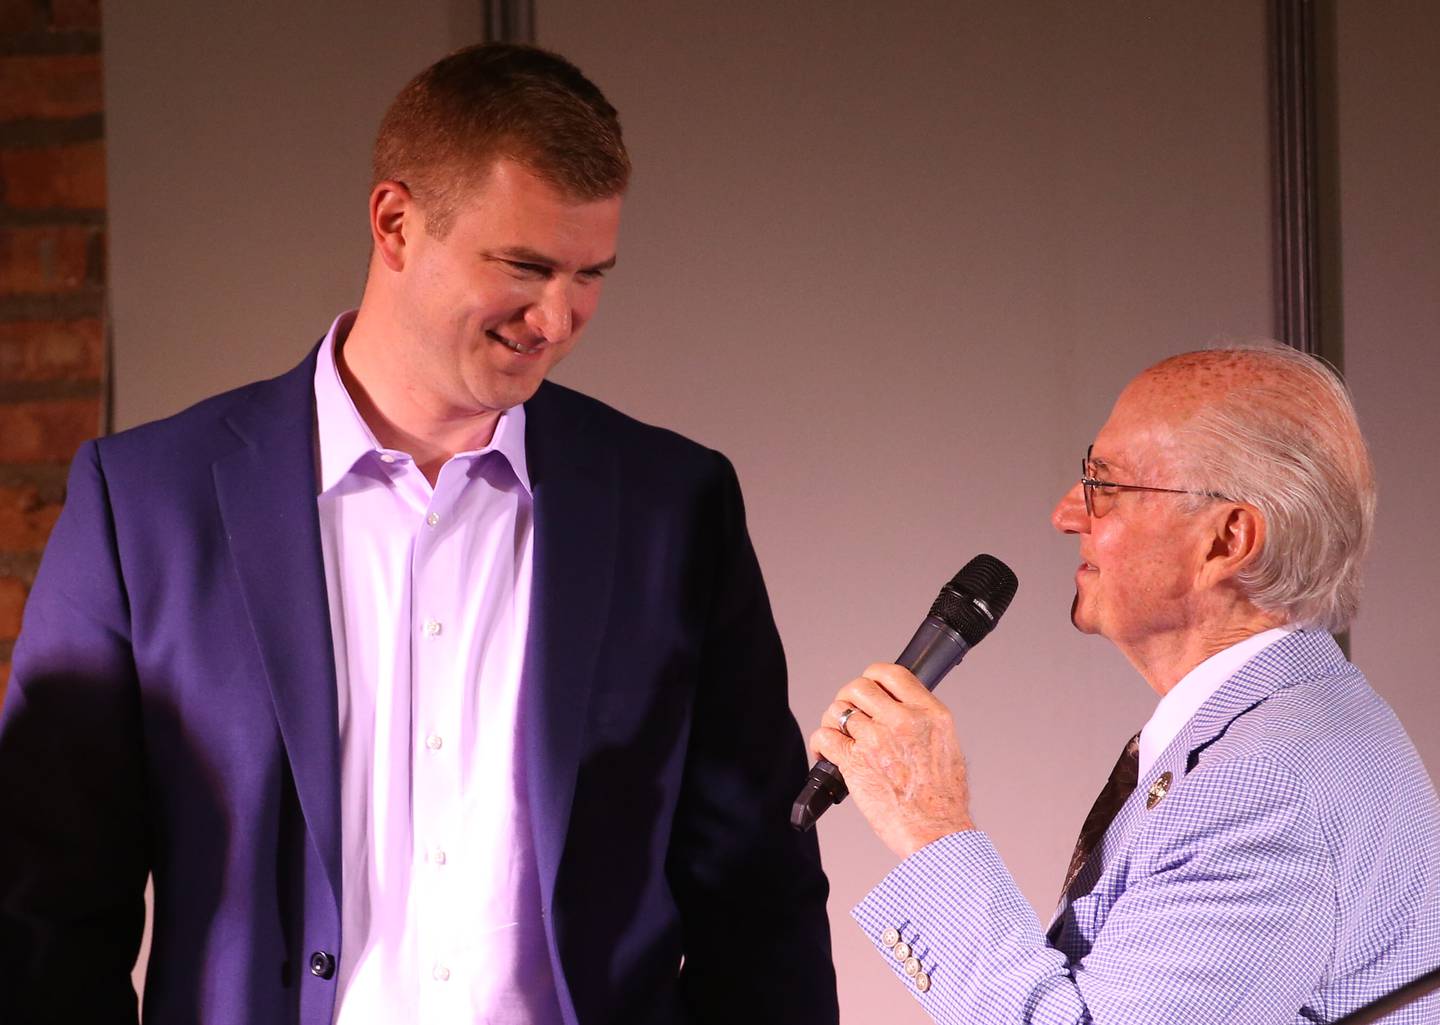 Carlton Fay is interviewed by Lanny Slevin Emcee during the Shaw Media Illinois Valley Sports Hall of Fame on Thursday, June 8, 2023 at the Auditorium Ballroom in La Salle. Fay was a star basketball player at Putnam County High School and led the team to the Class 1A State tournament in 2007.